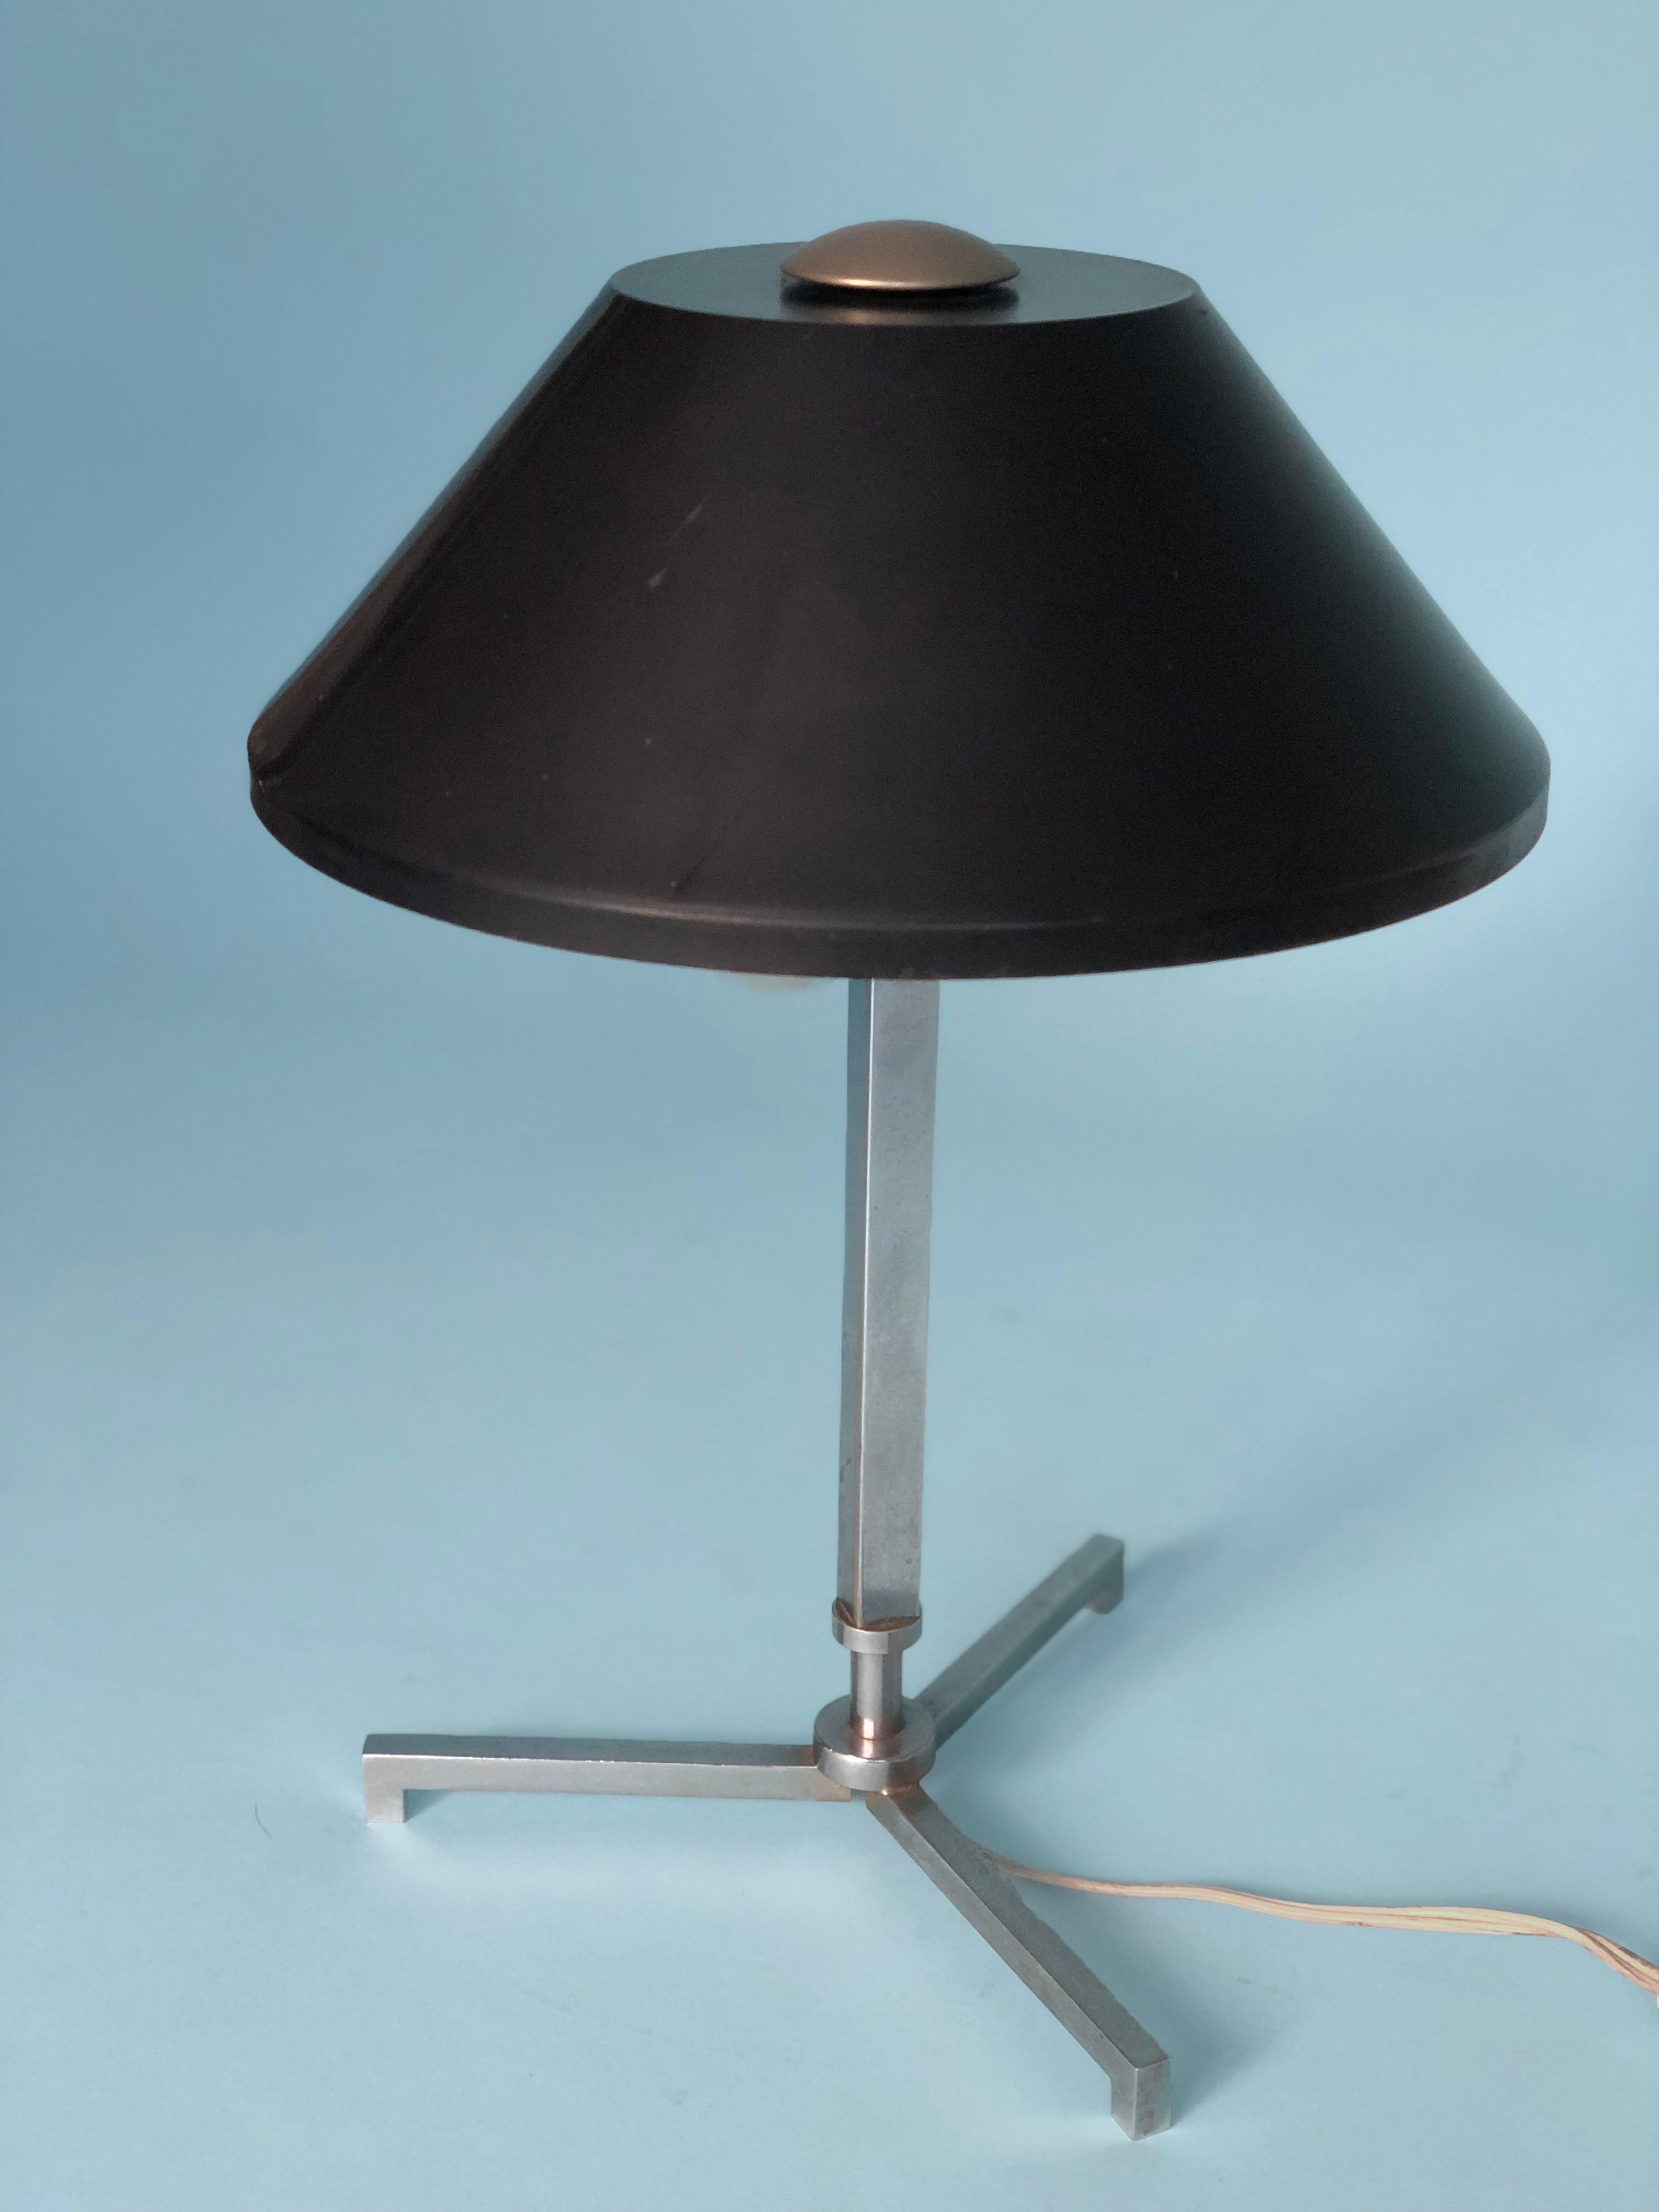 Chrome table lamp by Jo Hammerborg from Denmark 1960s. The lamp has 2 bulbs, a chrome 3 legs base and a metal black shade. In excellent vintage condition.

Designer: Jo Hammerborg for Fog & Mørup
Style: Mid century Modern
Period: 1960
Country